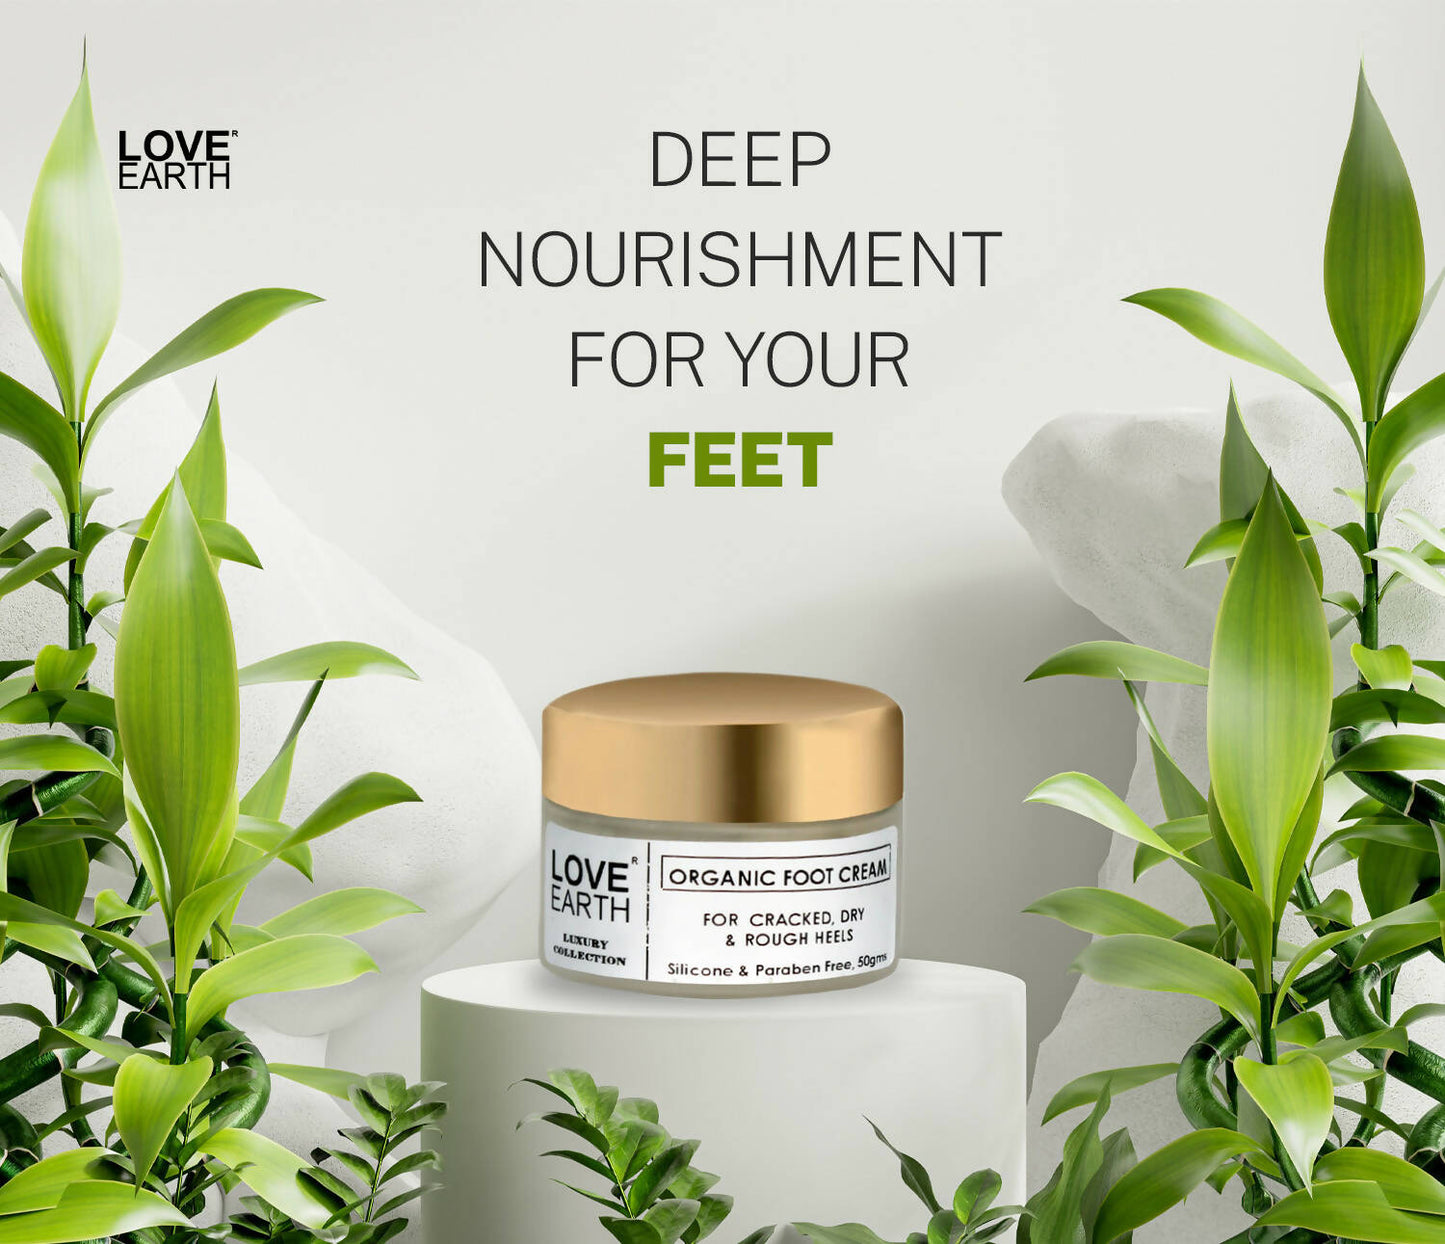 Love Earth Organic Foot Cream For Cracked & Dry Heels